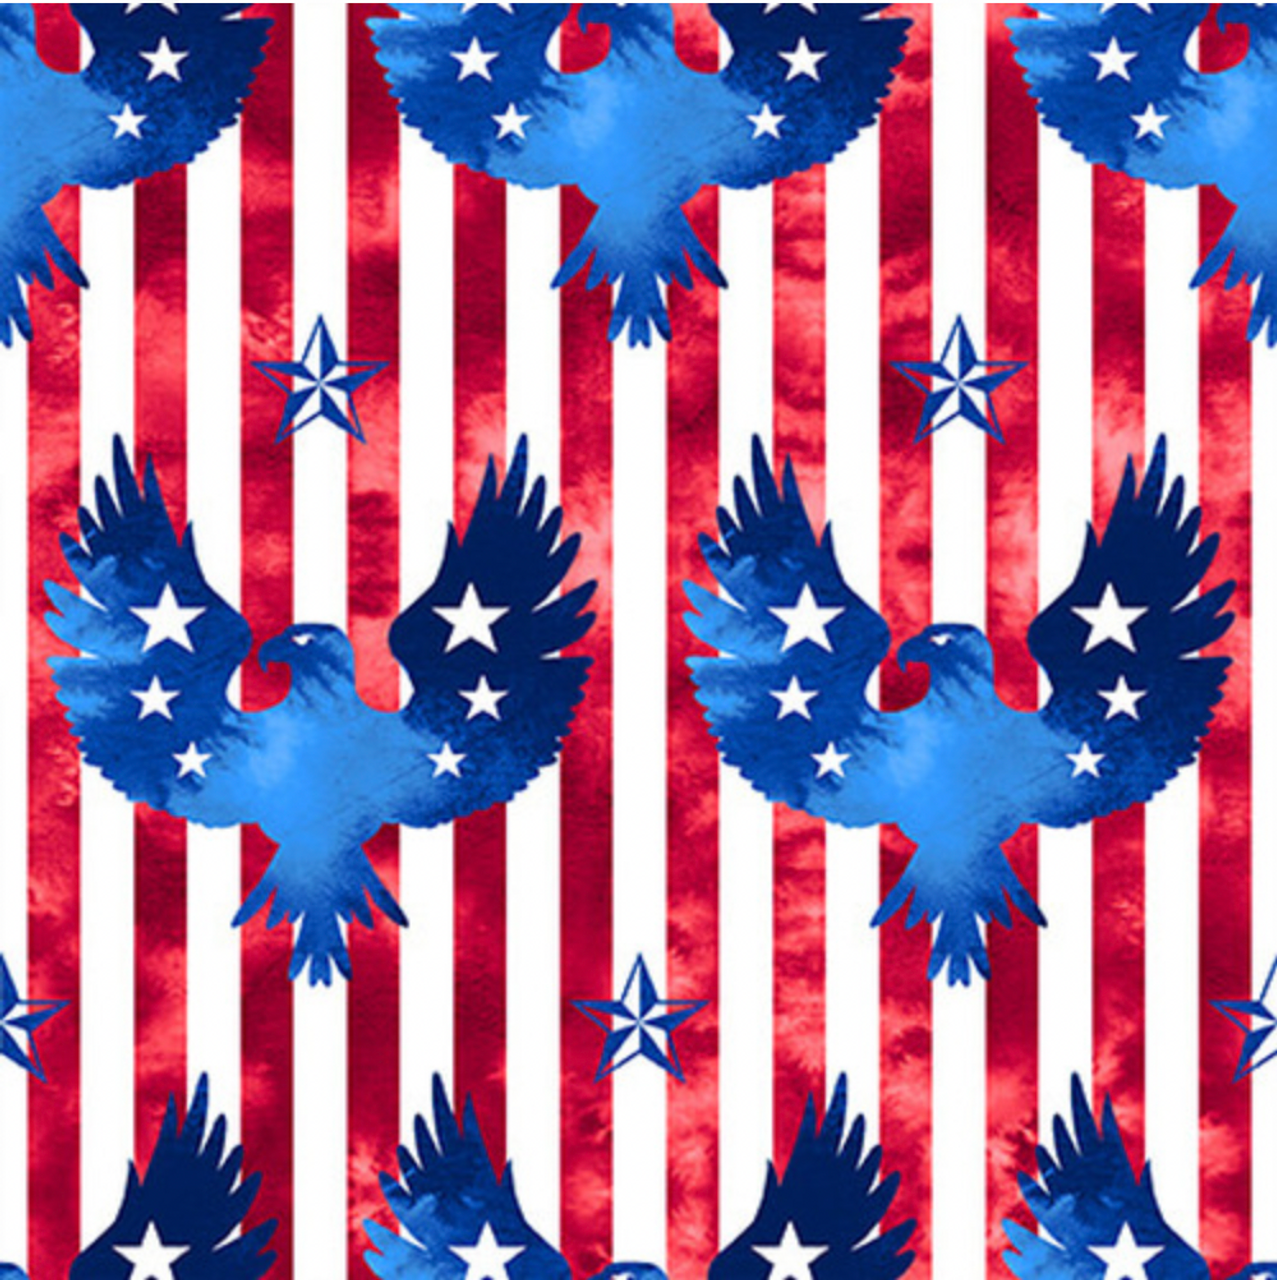 Blank Quilting One Land, One Flag Patriotic Eagle Blue Cotton Fabric By The Yard